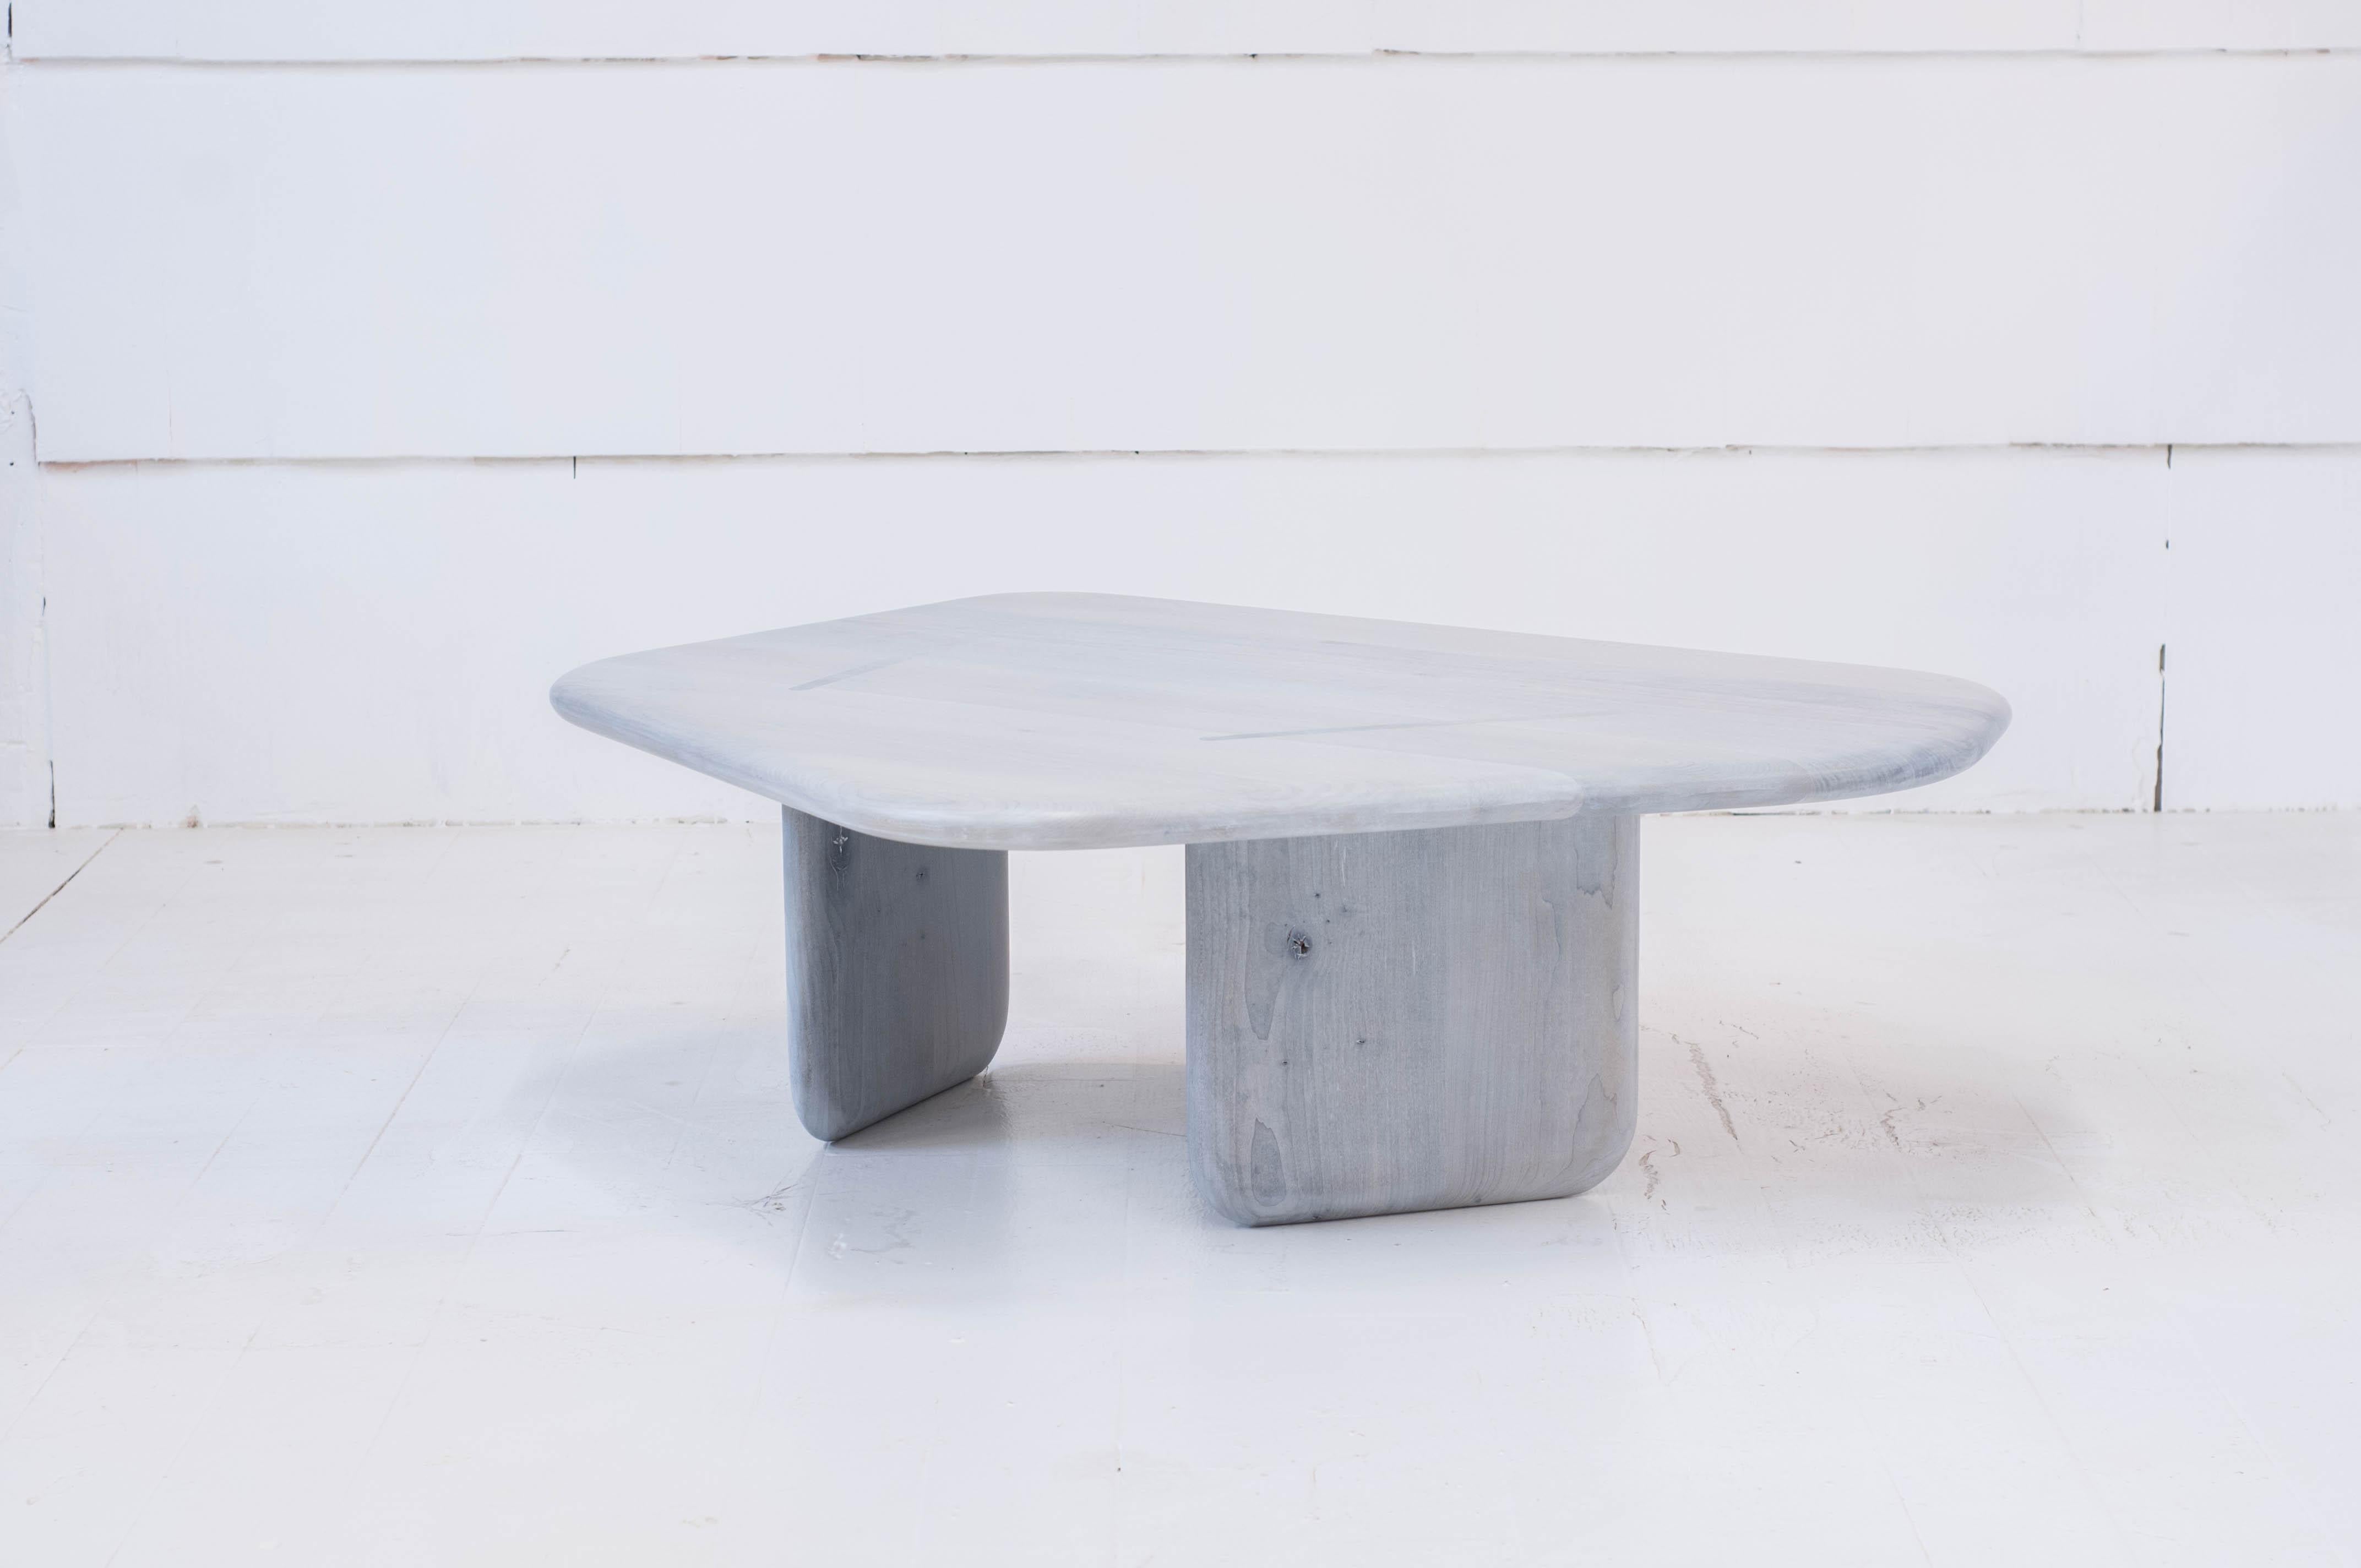 Dolmen are Neolithic structures found largely around Europe which consist of upright pillars and large table surfaces from up to 7000 years ago. We have reinterpreted their forms as a series of asymmetrical coffee tables.